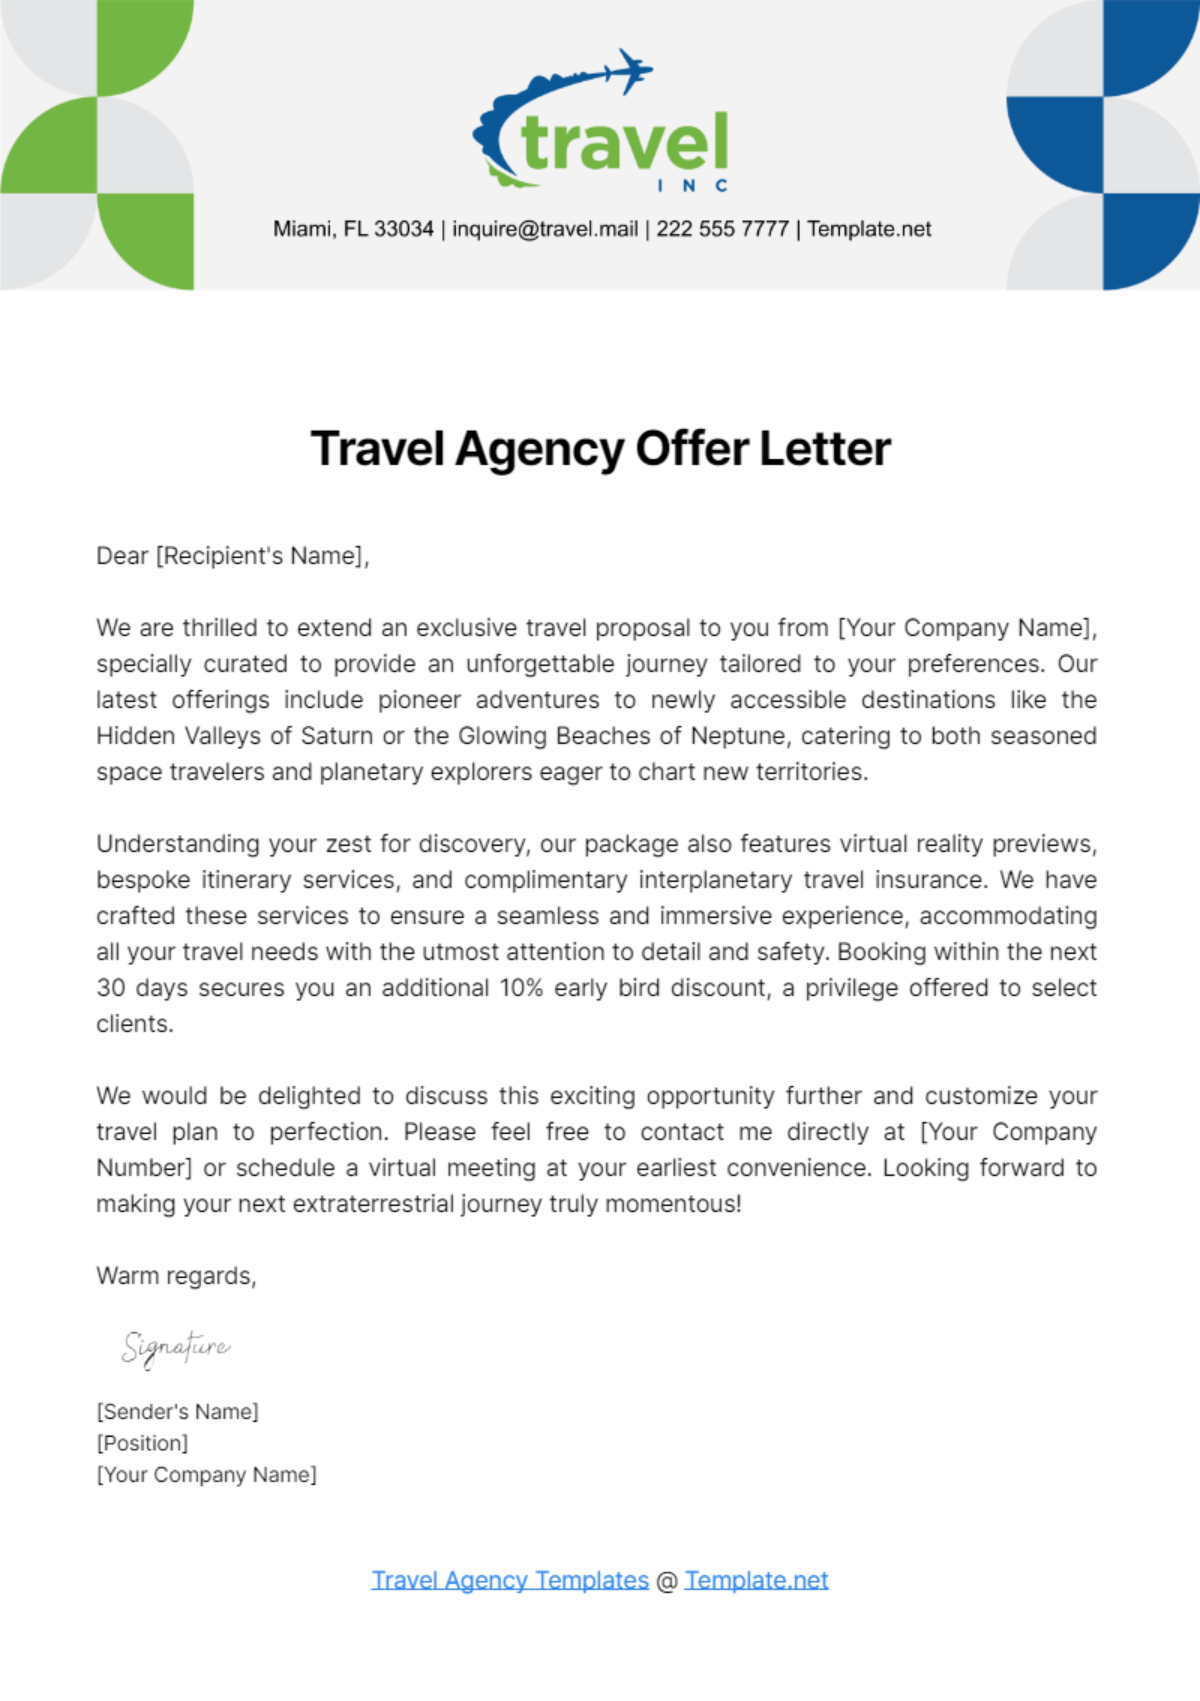 Free Travel Agency Offer Letter Template